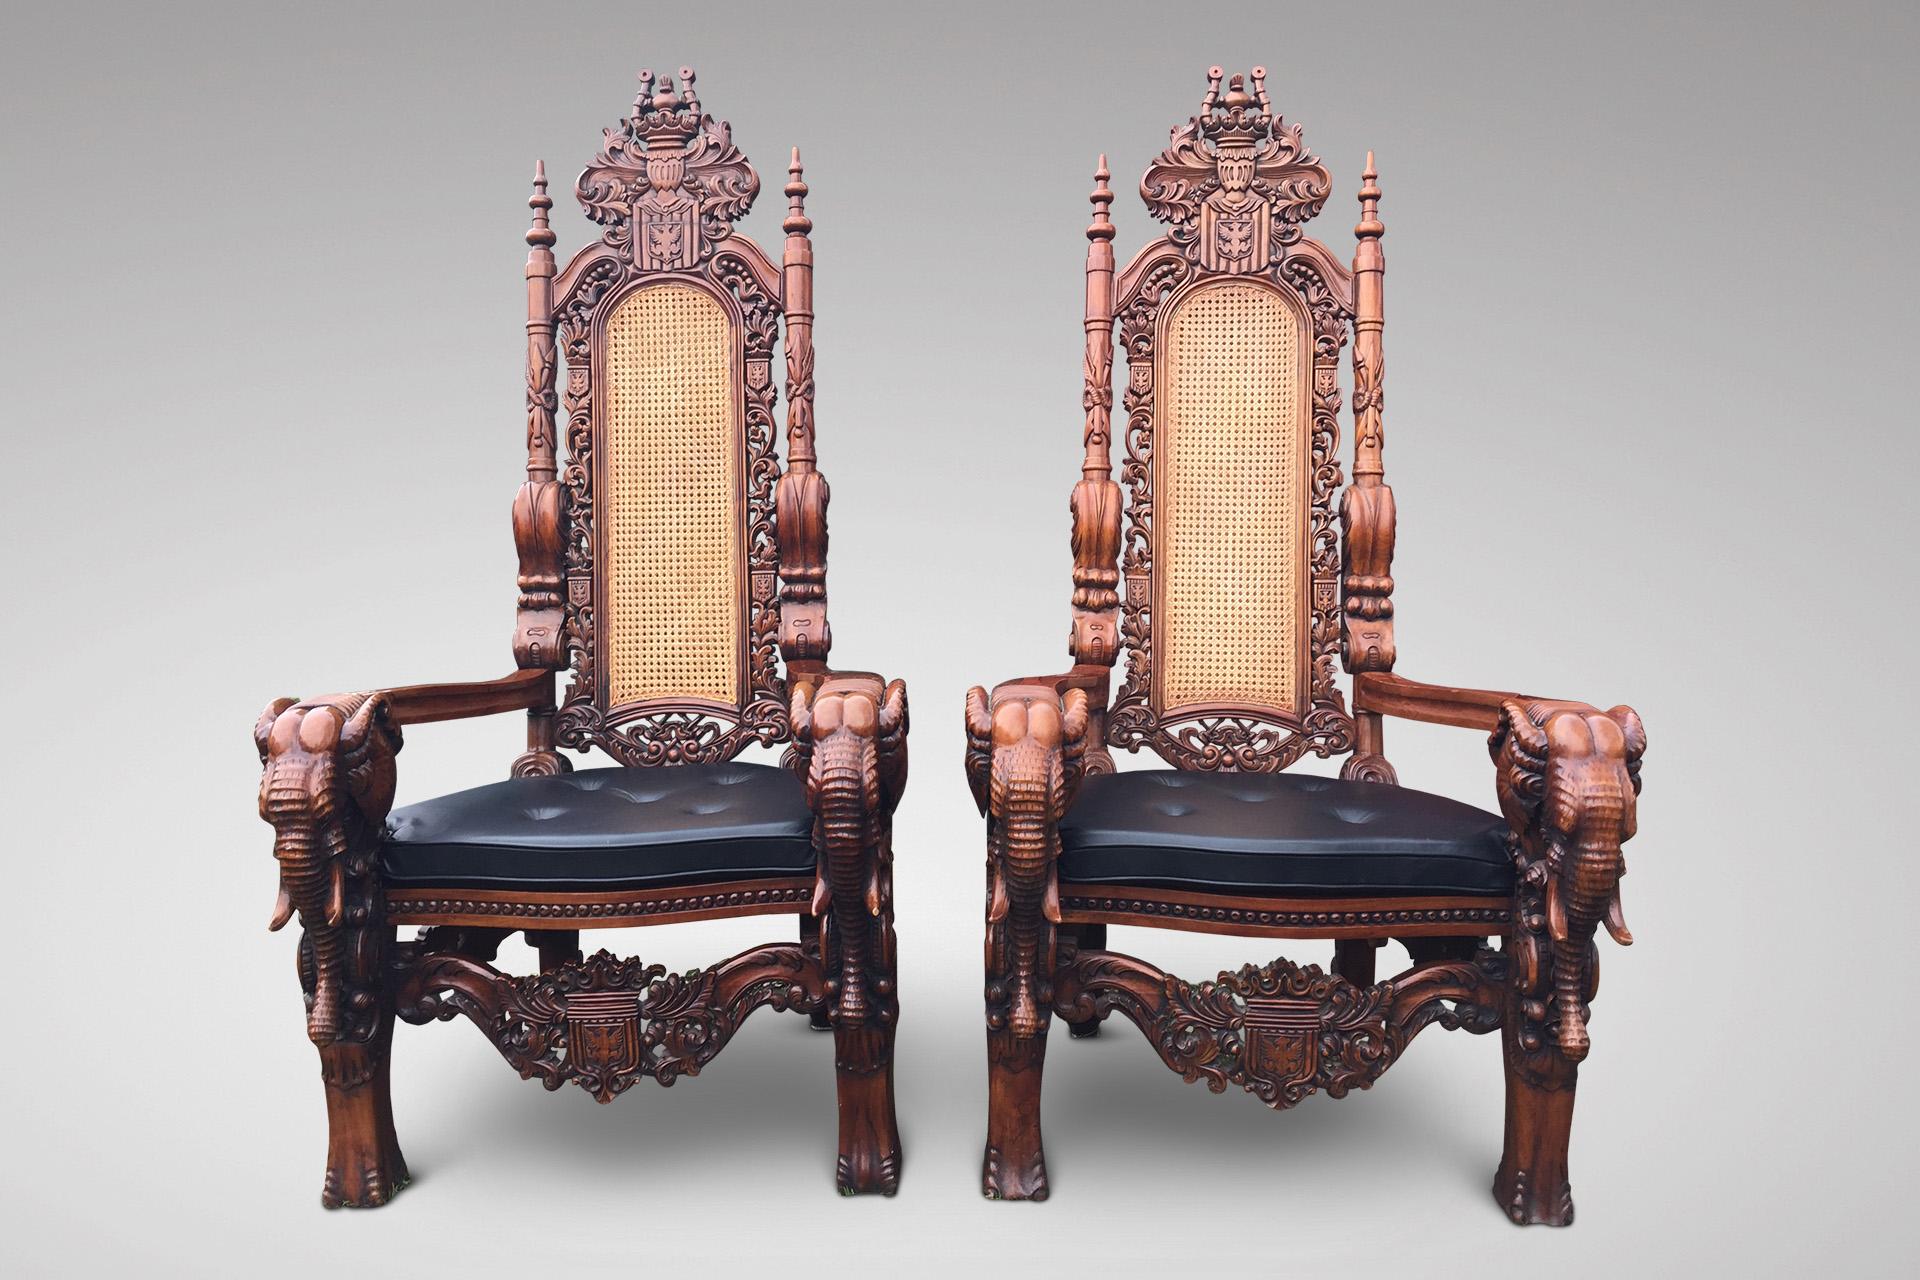 An antique pair of impressive carved walnut elephant high backed Throne Armchairs, cane back and seat rest, with a fitted black leather loose cushion. Stunning quality.

The dimensions are:
Height: 178cm (70.1in)
Width: 94cm (37.0in)
Depth: 75cm